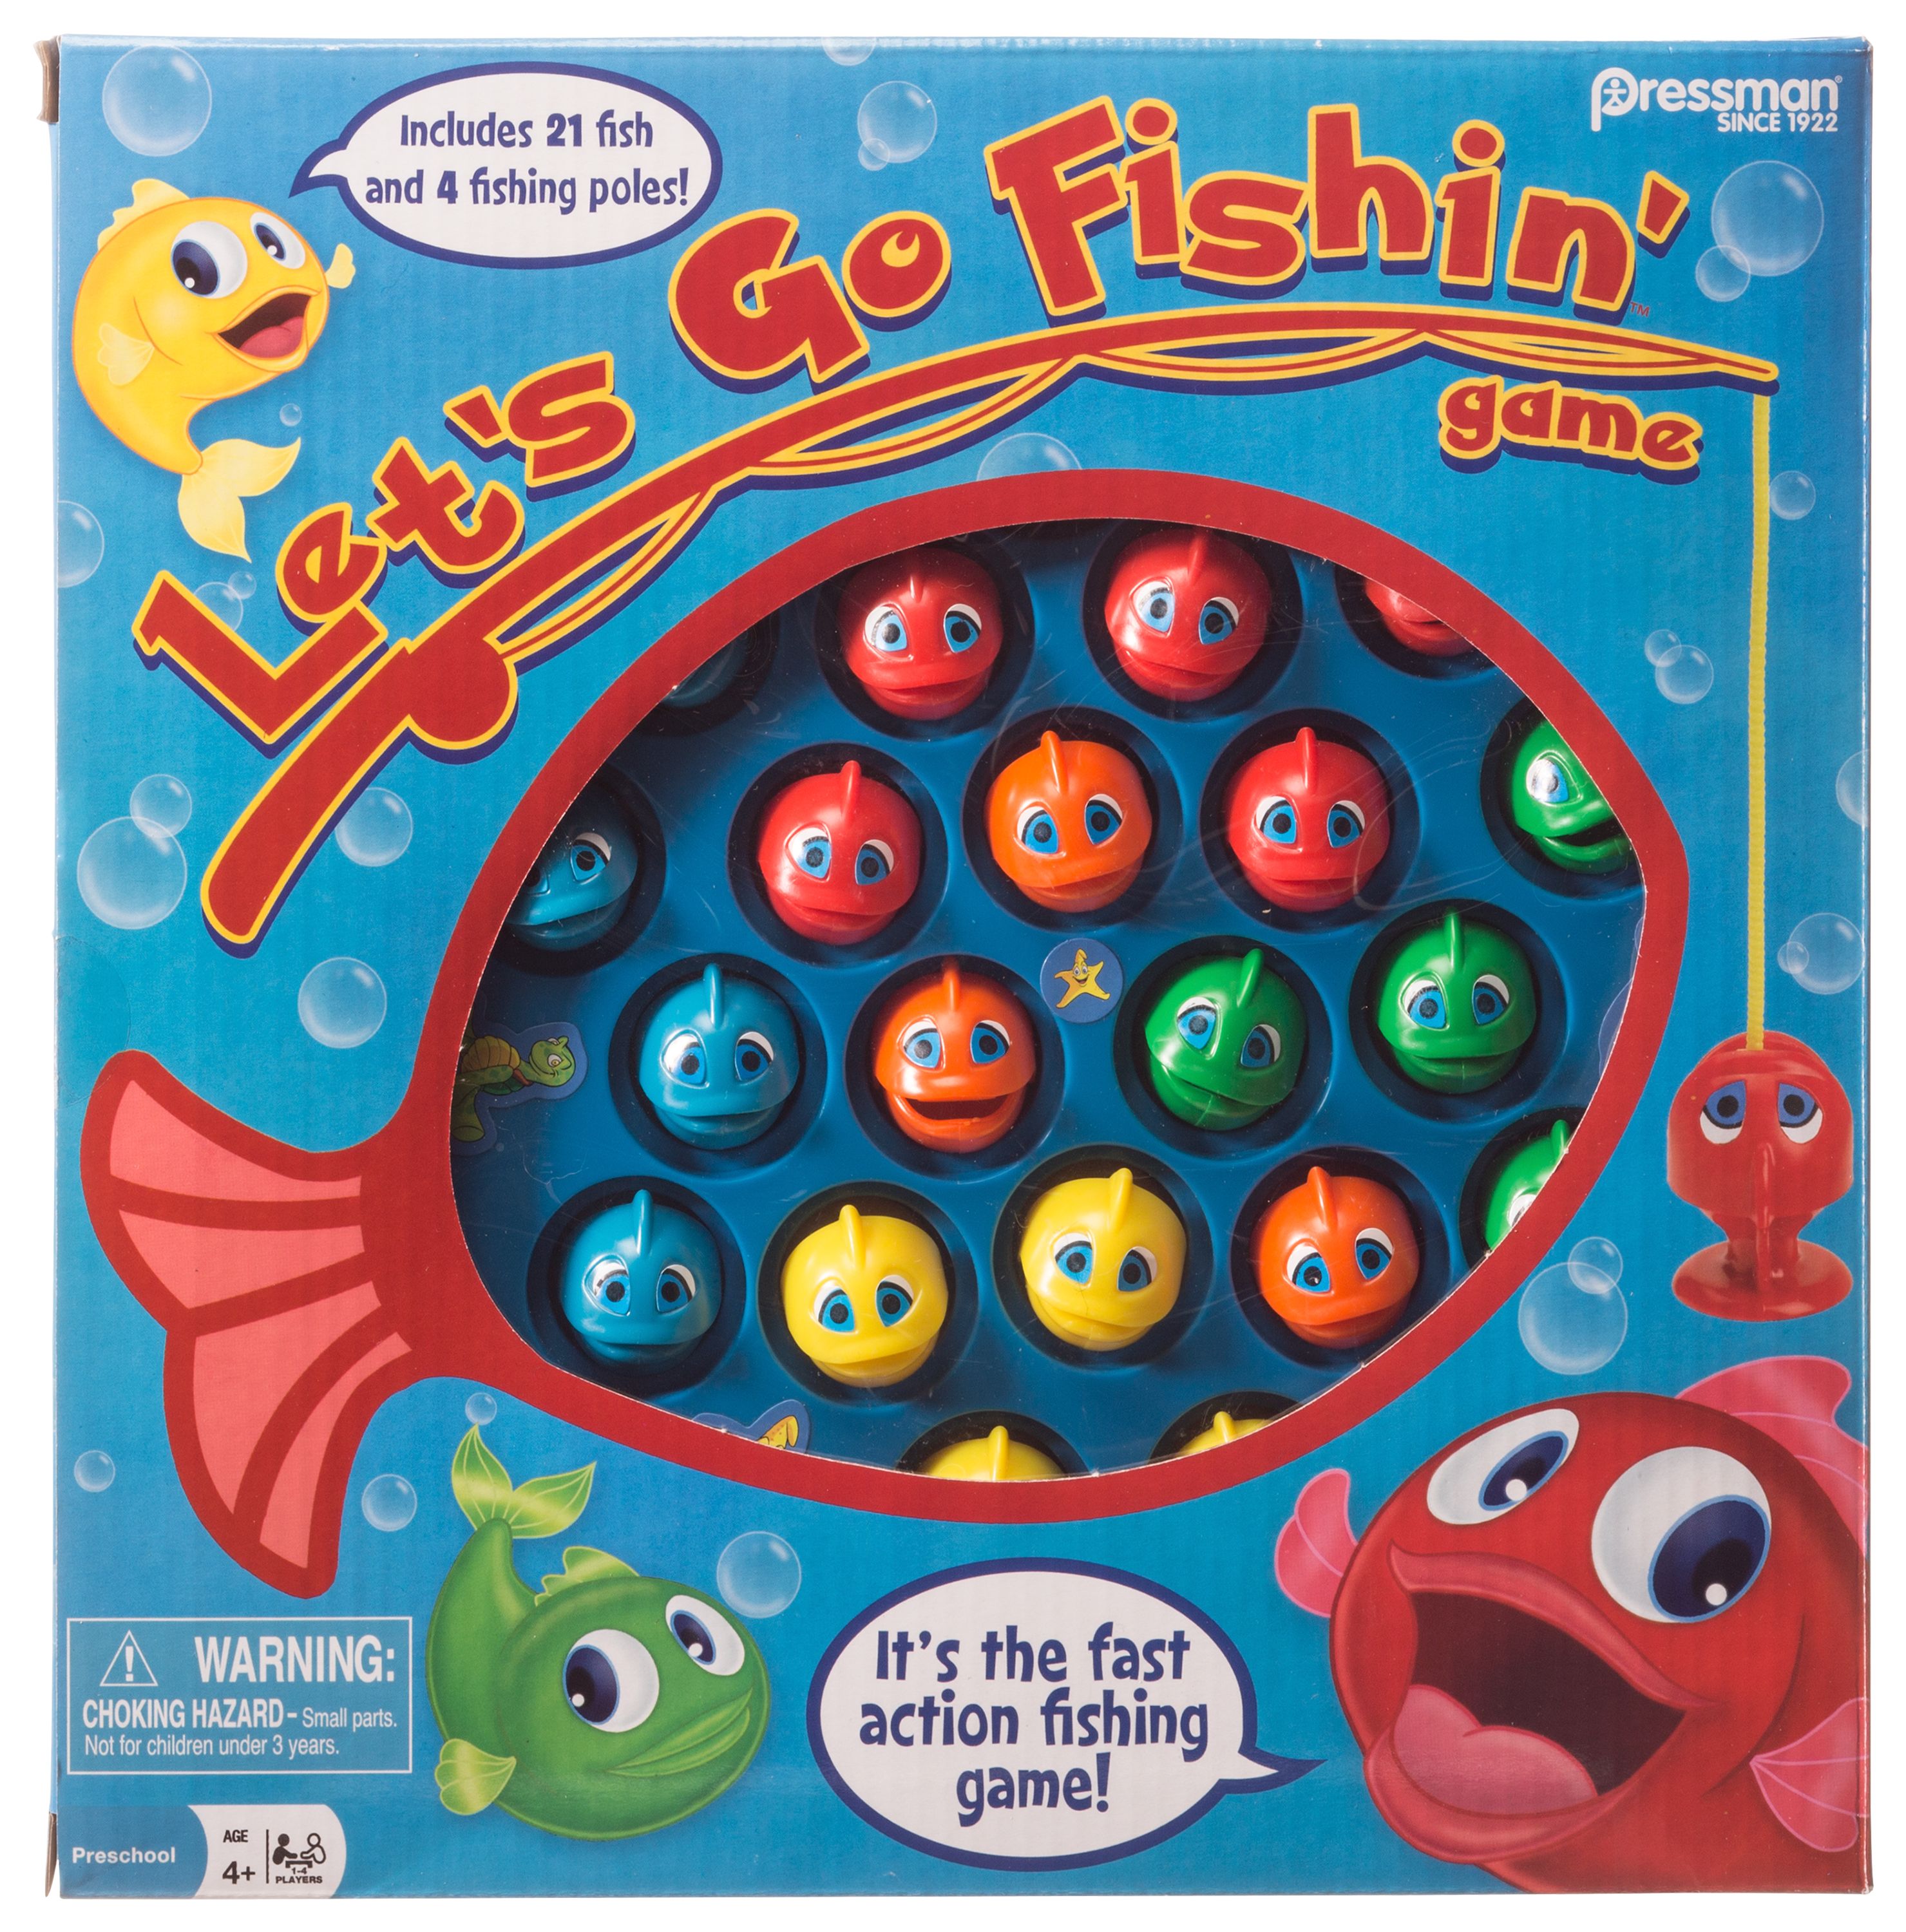 Wooden Fishing Game Toy, Iron Fishing Game Toy, Fish Game Children, Wooden Box